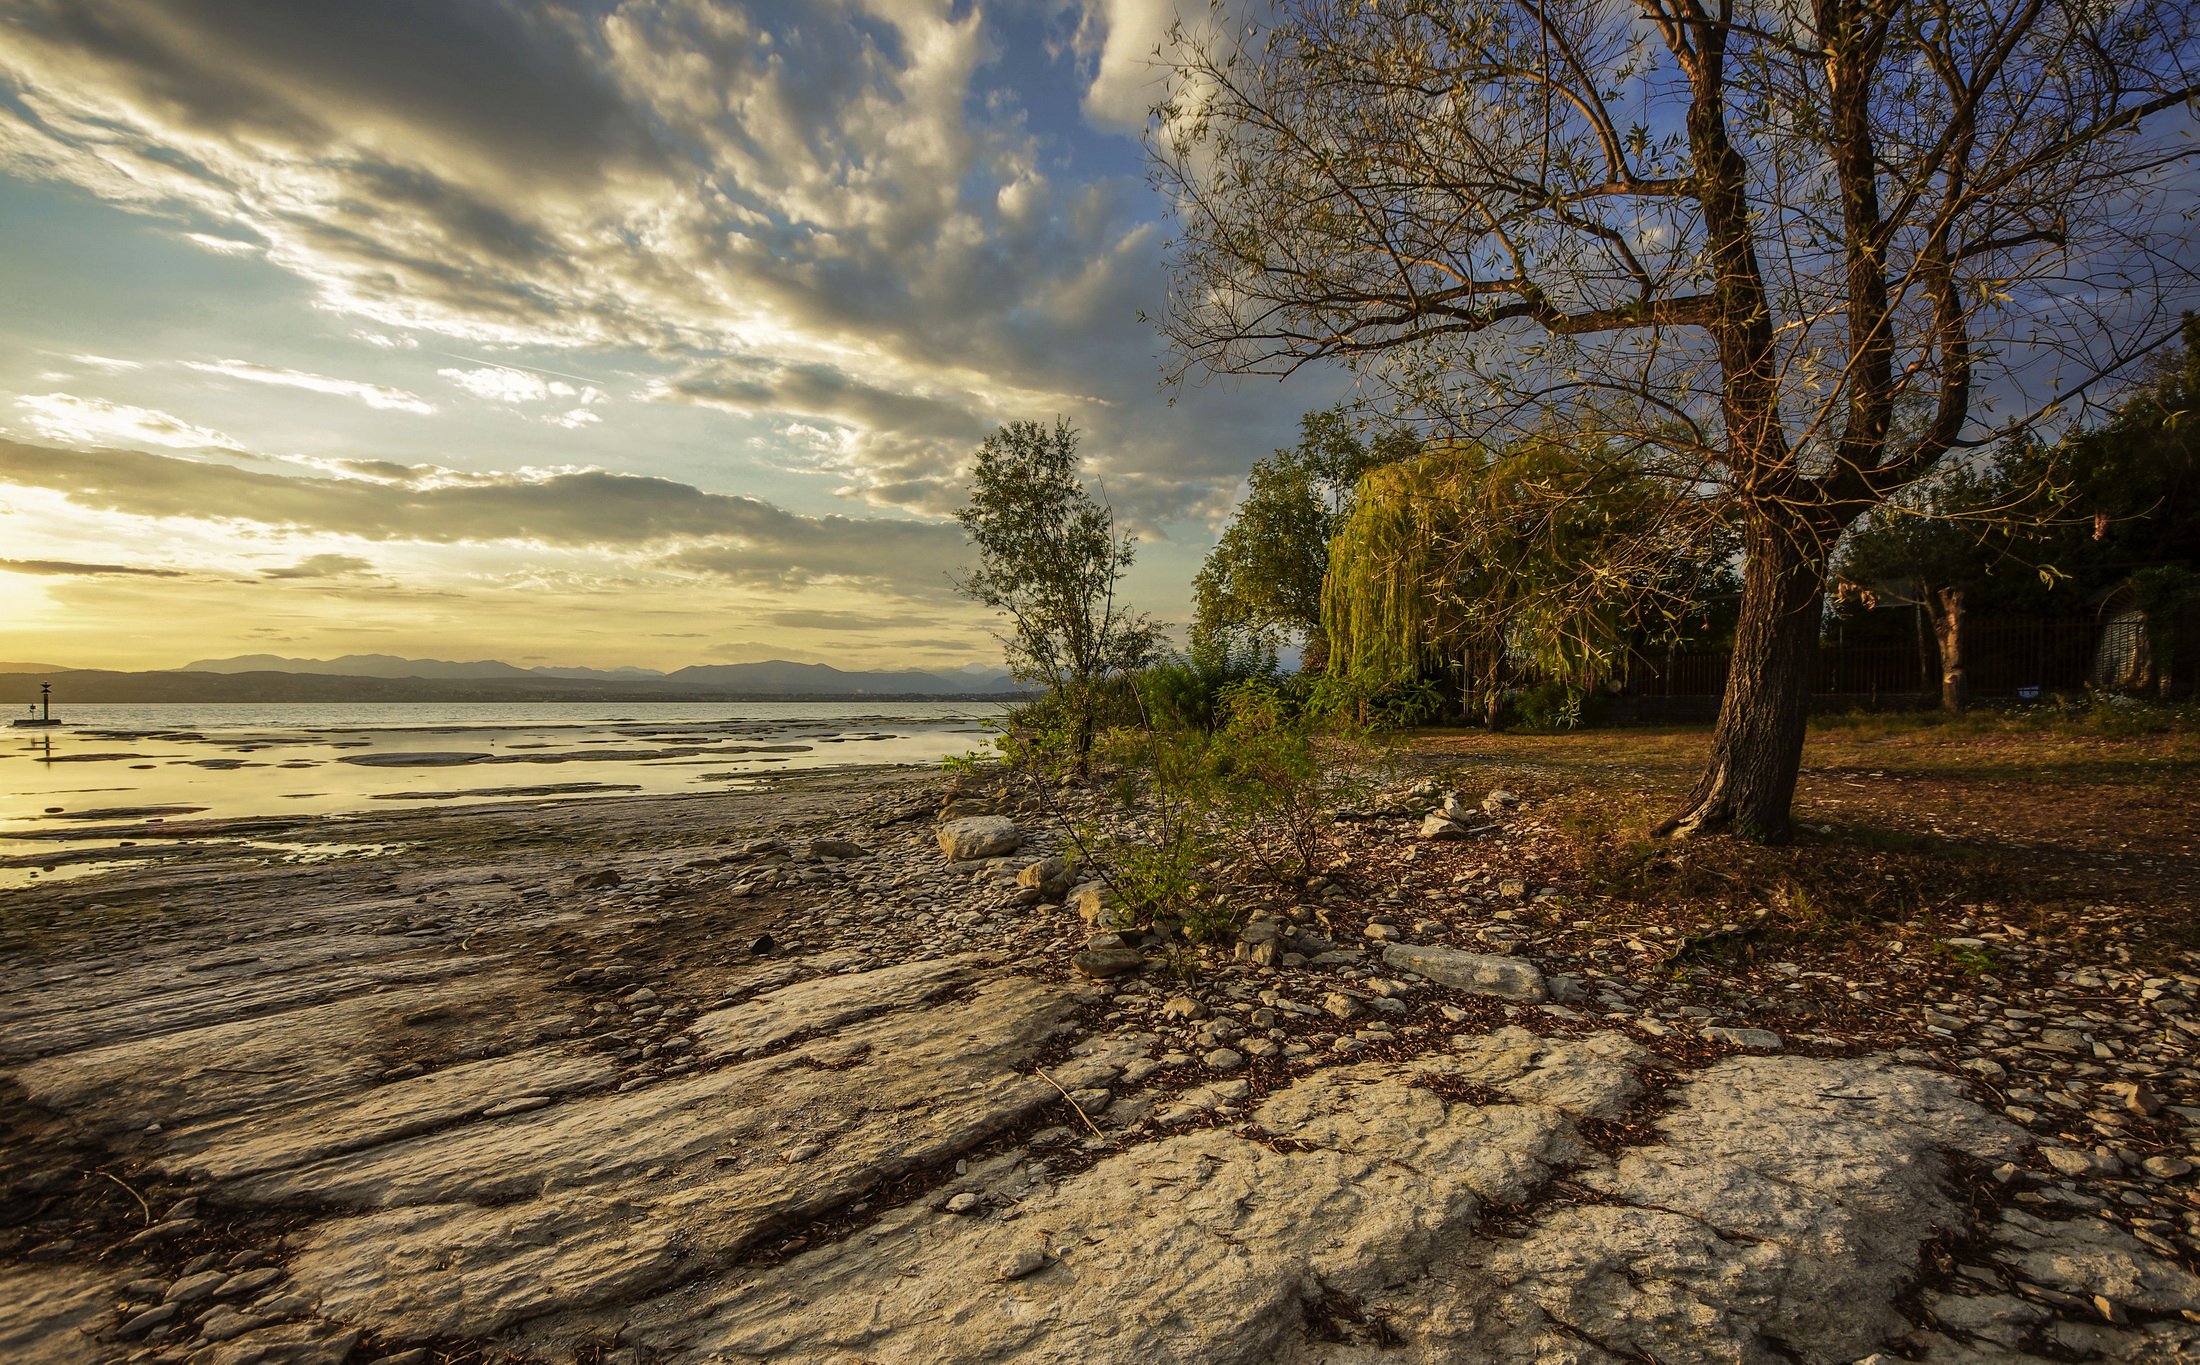 italy, Coast, Sunrises, And, Sunsets, Stones, Scenery, Clouds, Trees, Sirmione, Lombardy, Nature Wallpaper